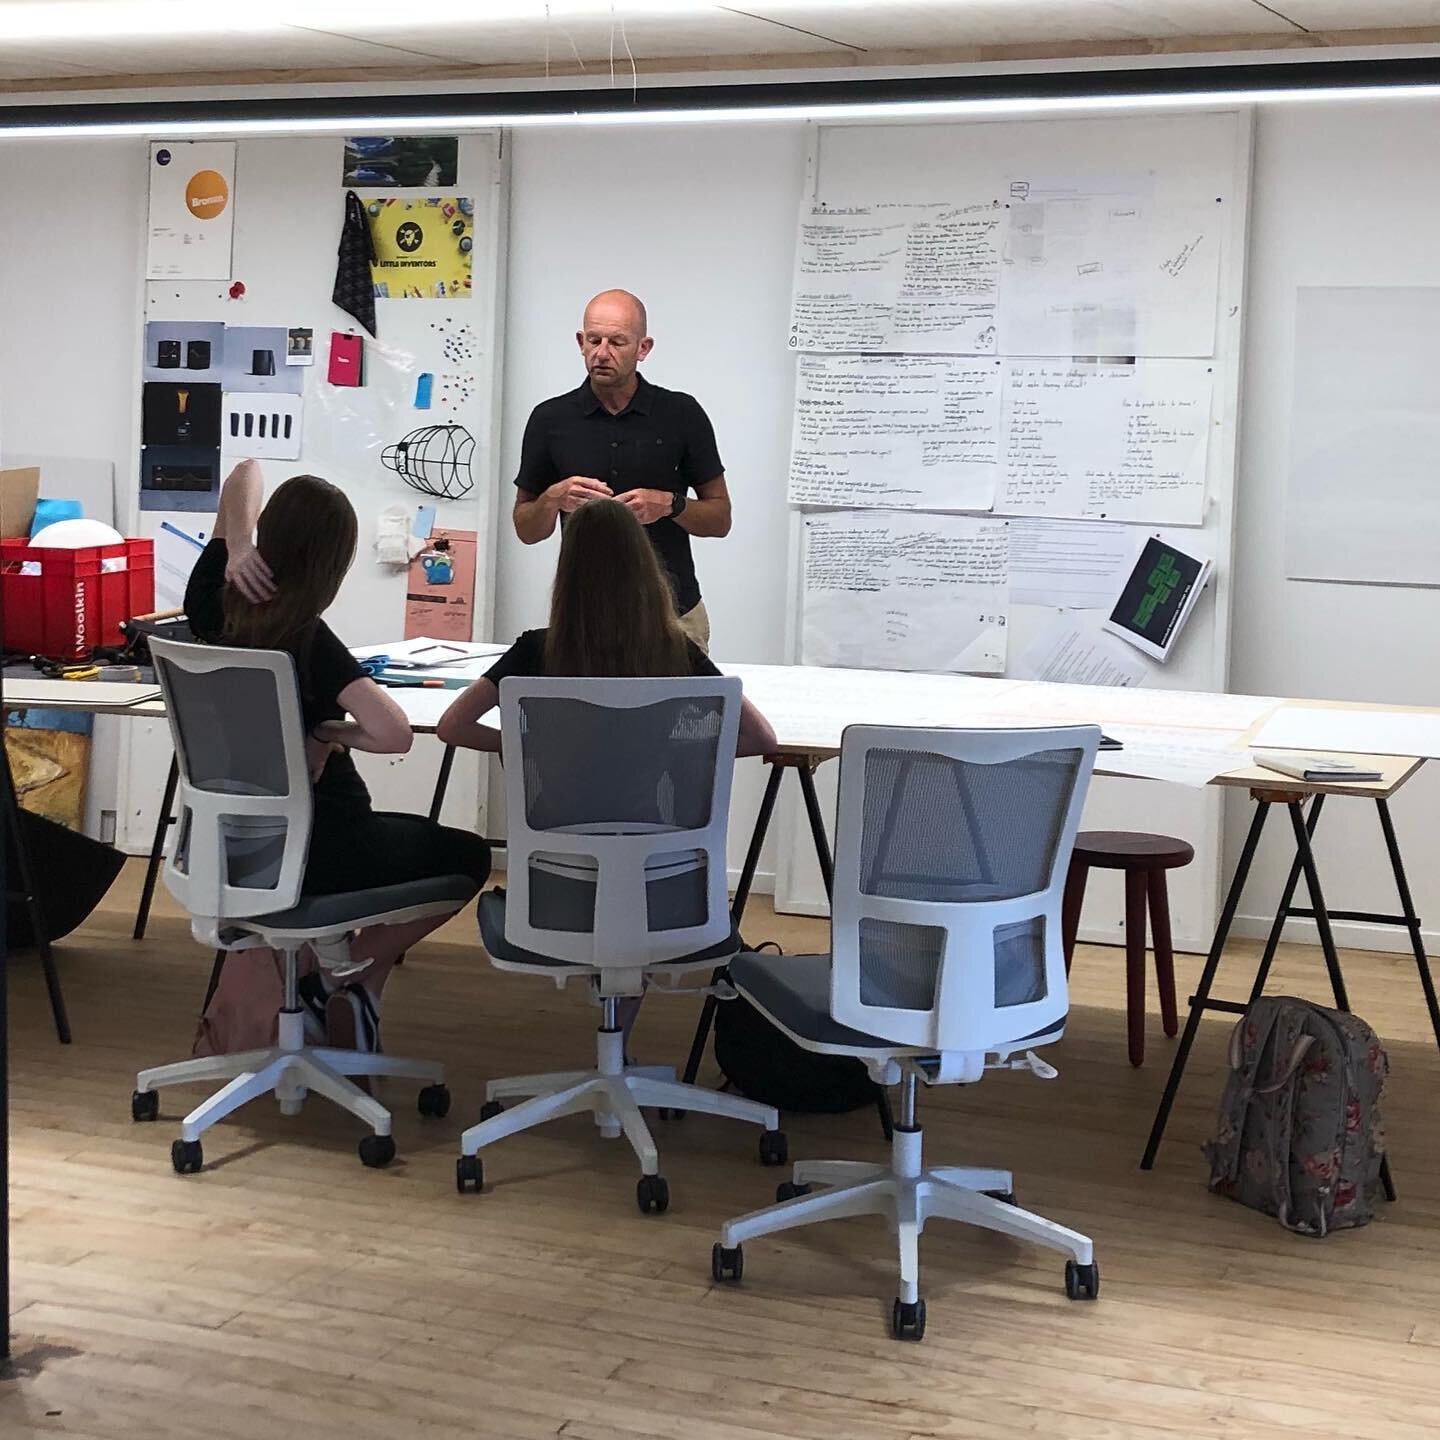 We are celebrating design day. Design is one of the most powerful acts for positive change. Here is one of our leaders giving forward to the next generation #worlddesignday #itsourvirtue #designleadership #designvangard #virtuo